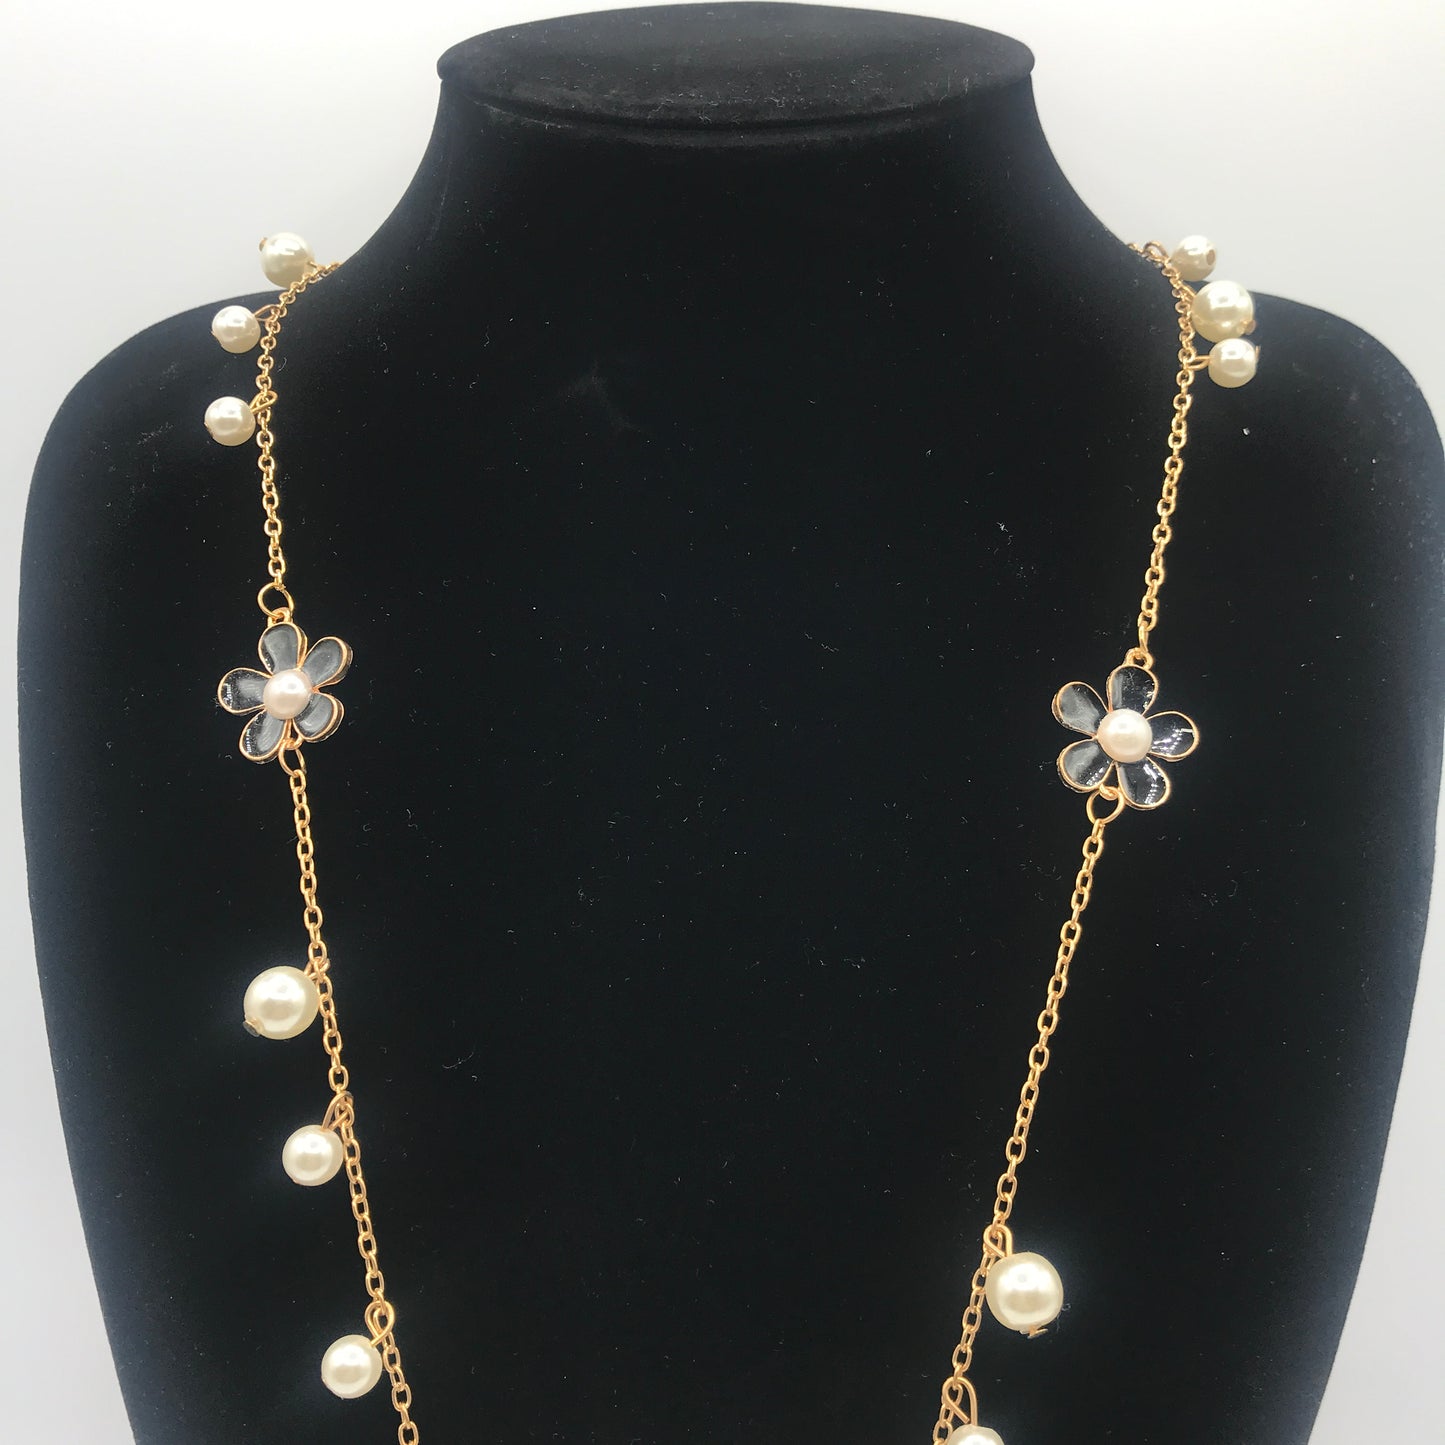 Five-petal flower with pearl sweater necklace